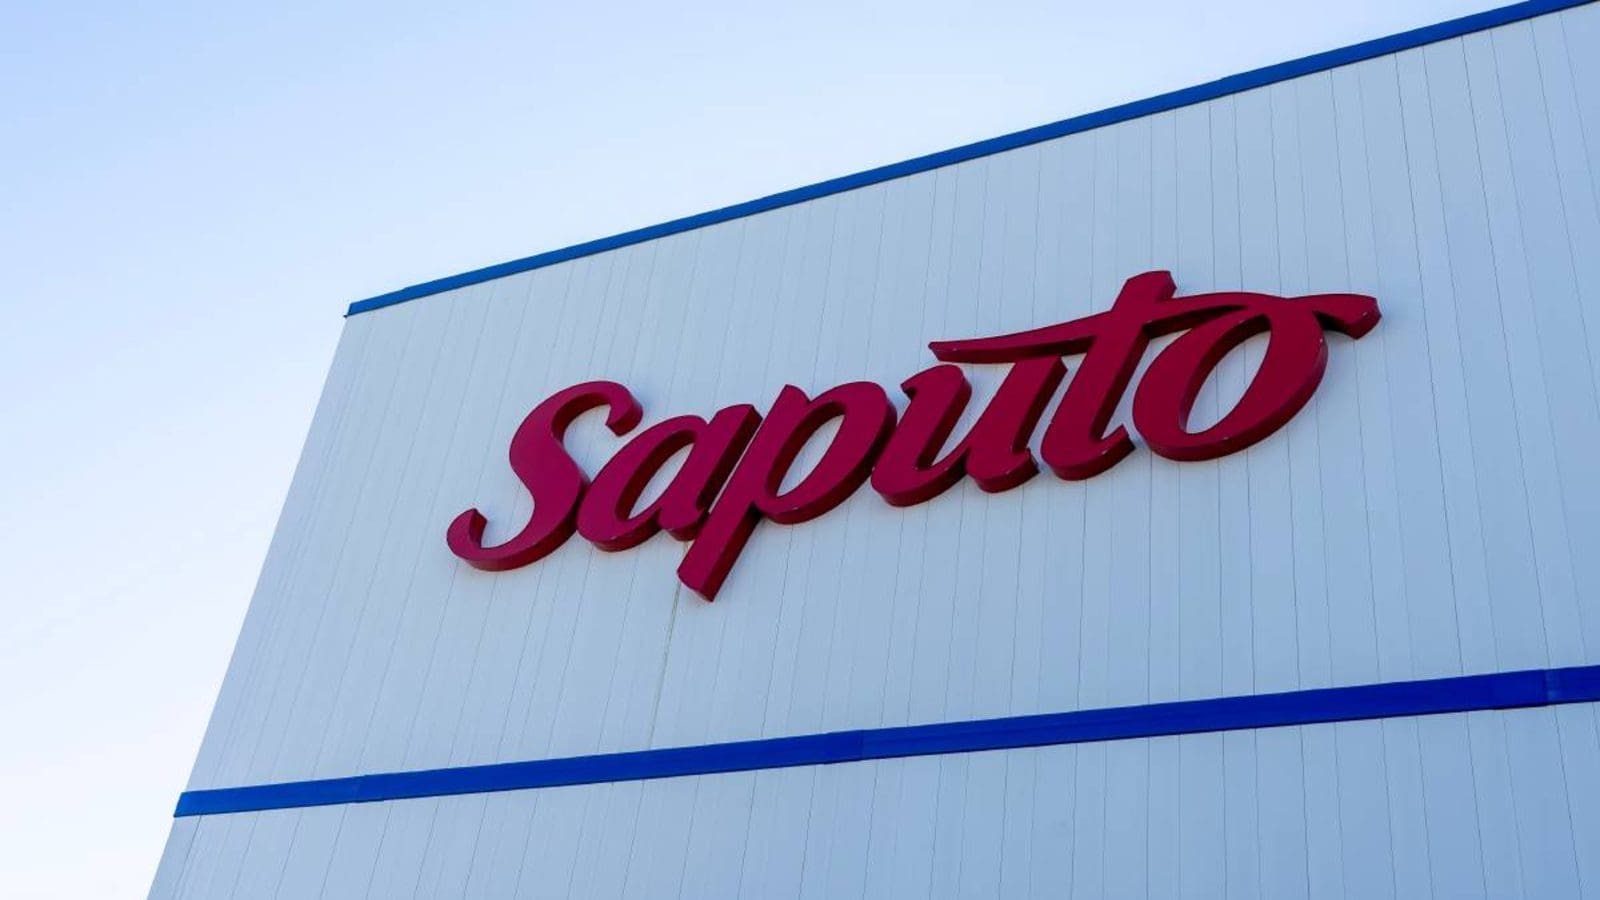 Regulatory decision on Coles’ acquisition of Saputo milk plants delayed amidst competition concerns